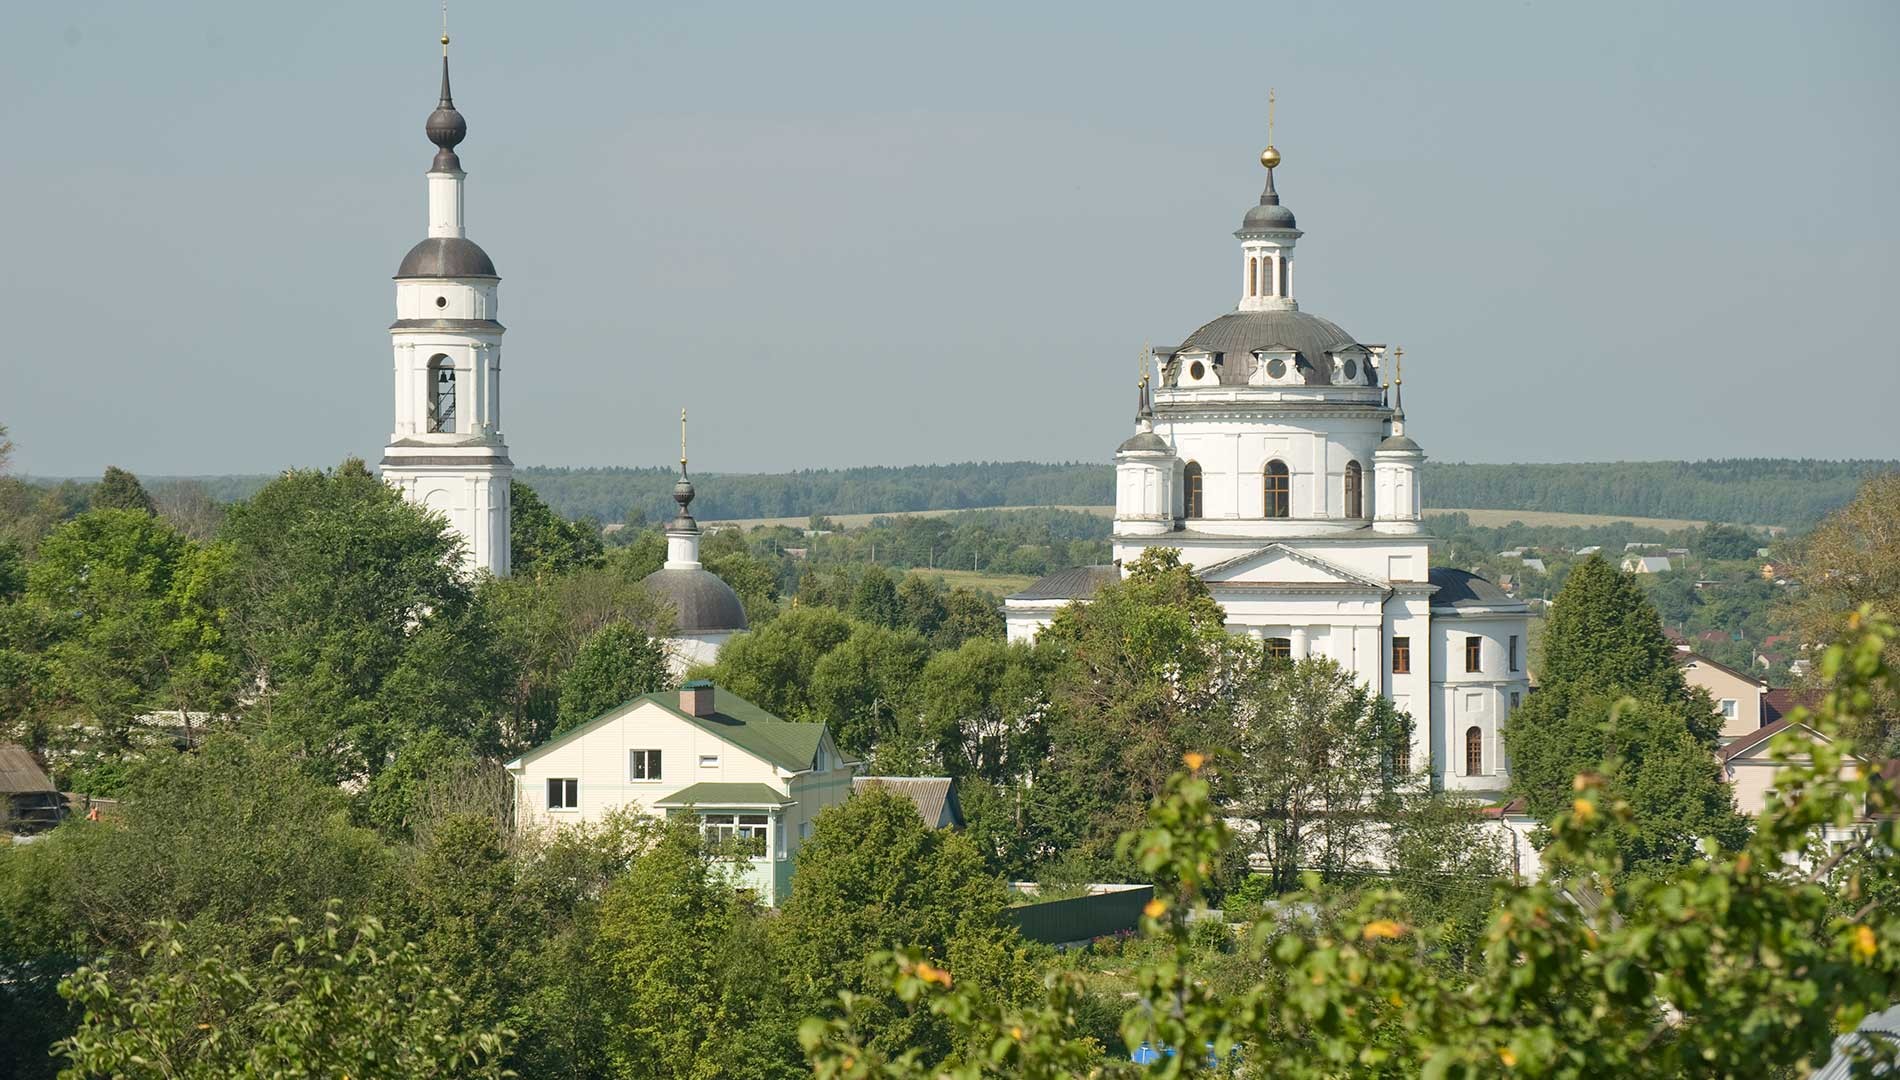 Maloyaroslavets. St. Nicholas-Chernoostrovsky Convent. Bell tower & Cathedral of St. Nicholas, south view. August 7, 2016